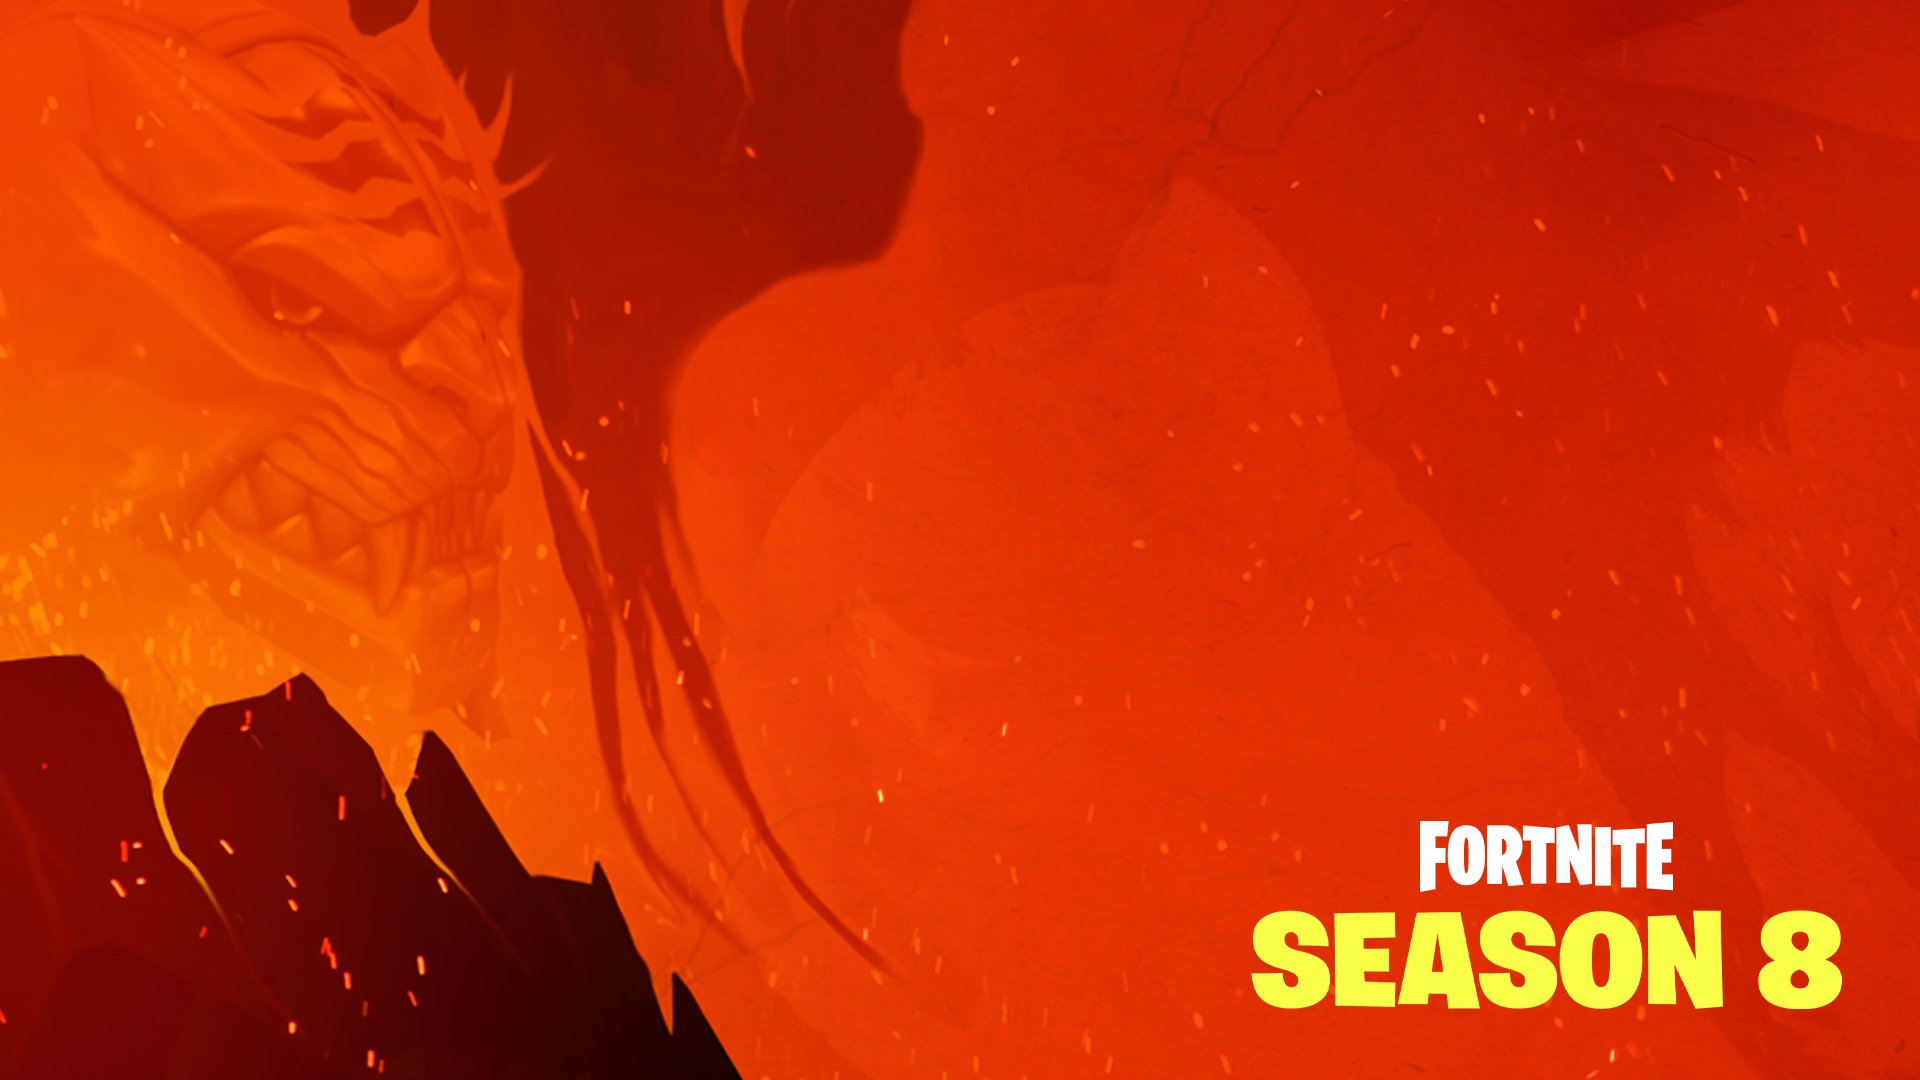 the company has further reinforced the pirates idea in other tweets such as its season 8 update schedule announcement where it said ahoy mateys - skins de fortnite temporada 8 banana